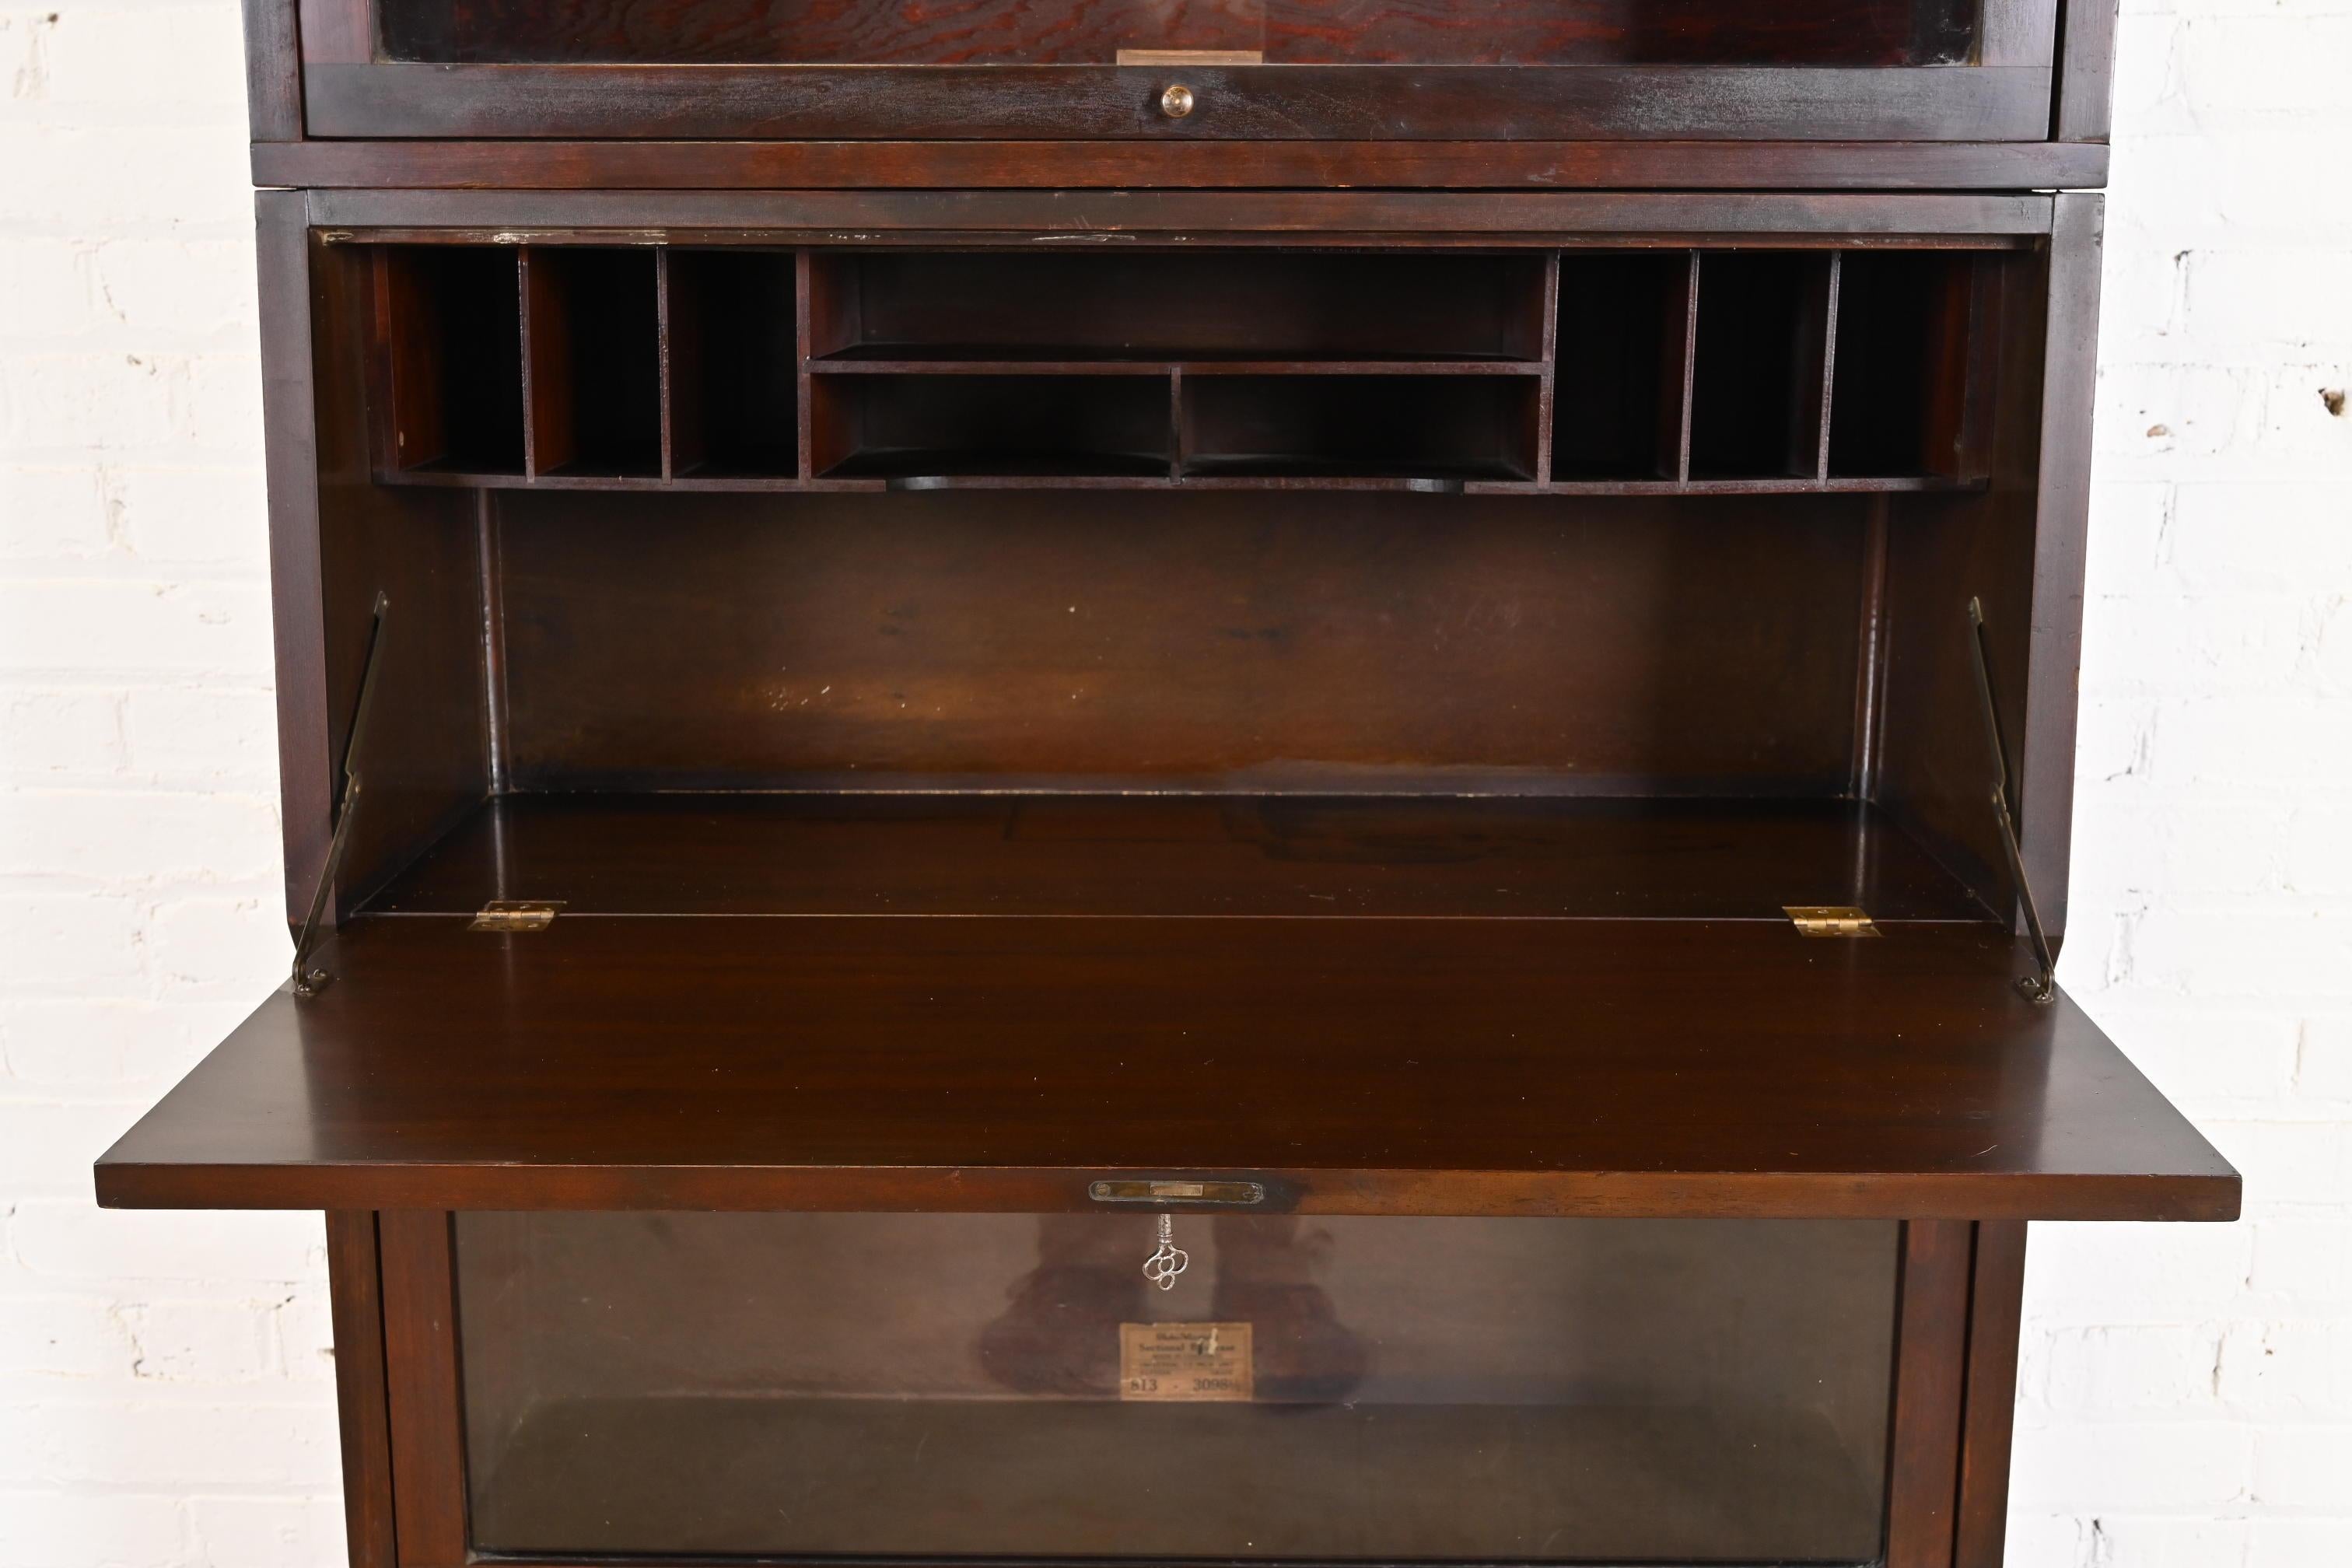 American Antique Arts & Crafts Mahogany Barrister Bookcase with Drop Front Secretary Desk